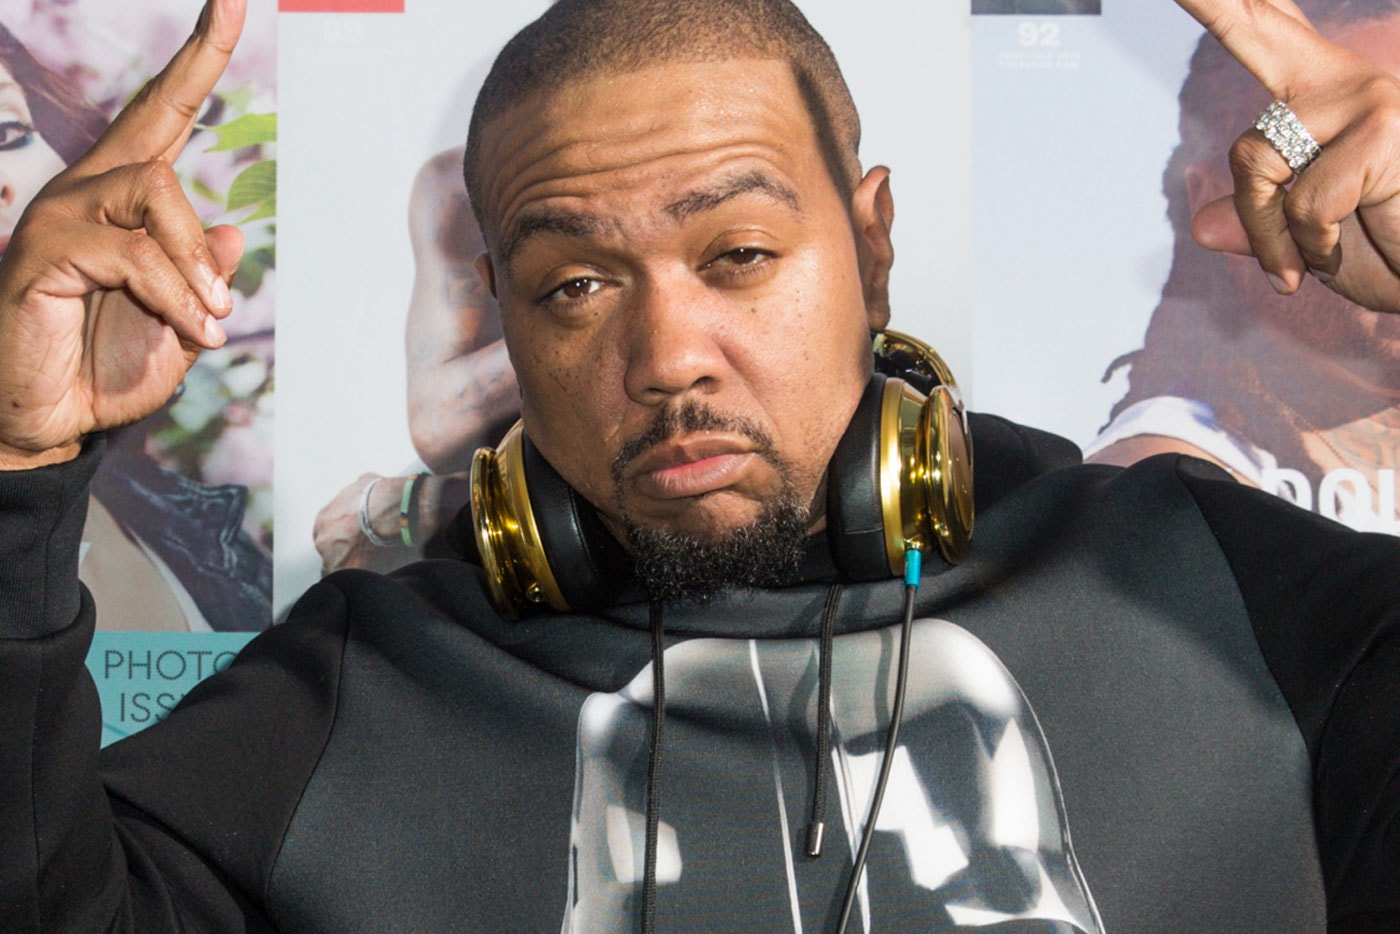 Timbaland's 'King of Kings' Tracklist Features Migos, Young Thug, 2 Chainz, Aaliyah & More